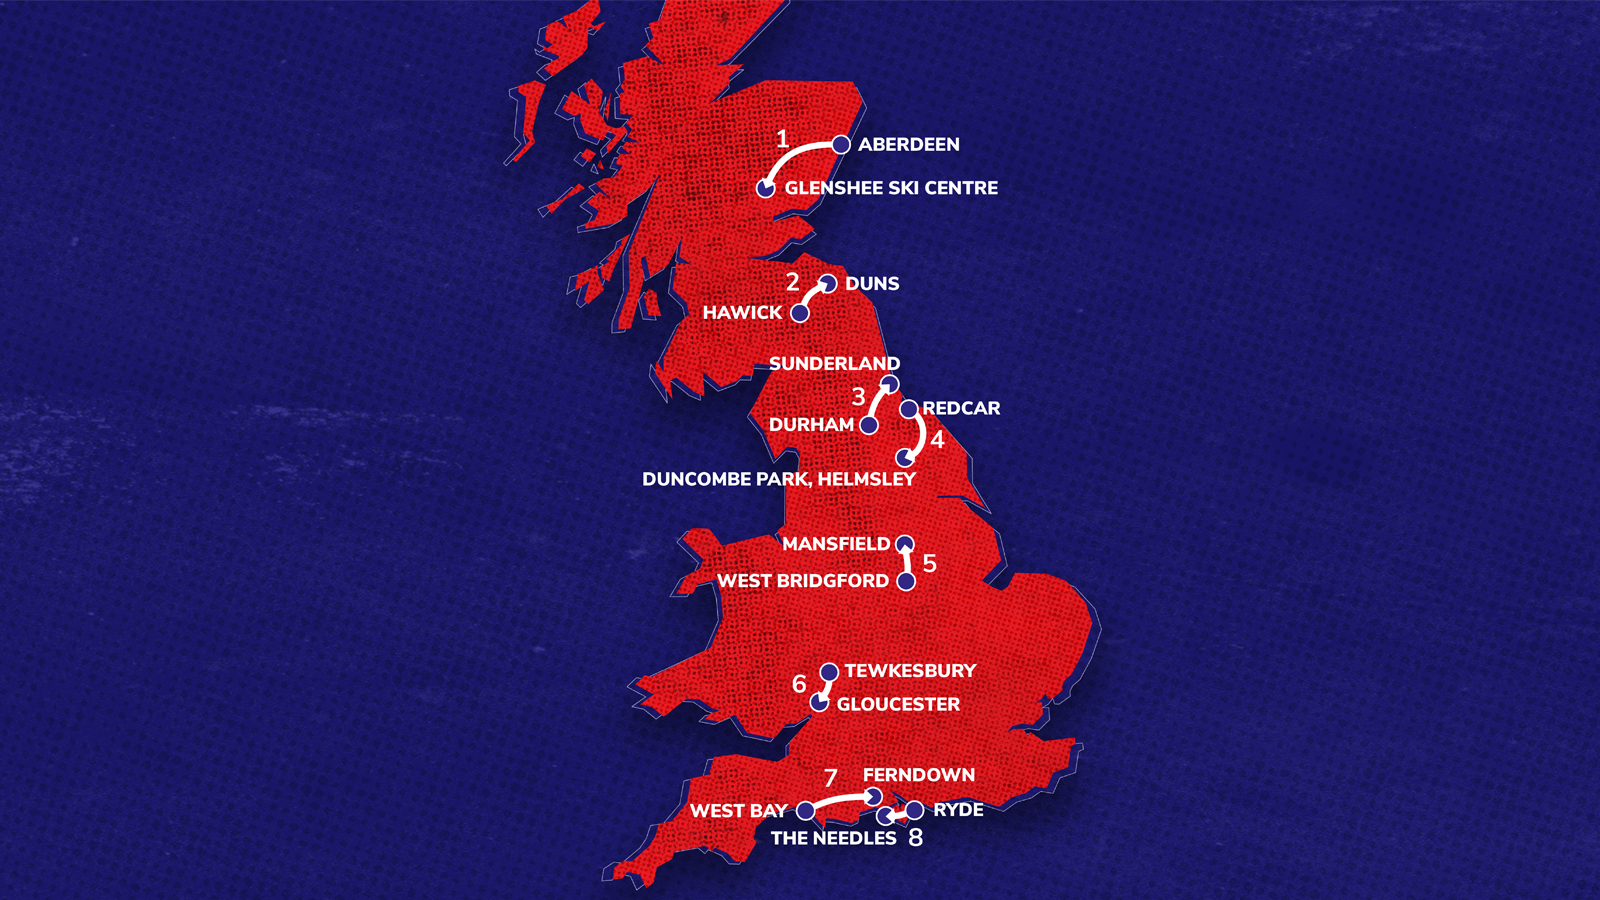 Tour of Britain 2022 stages